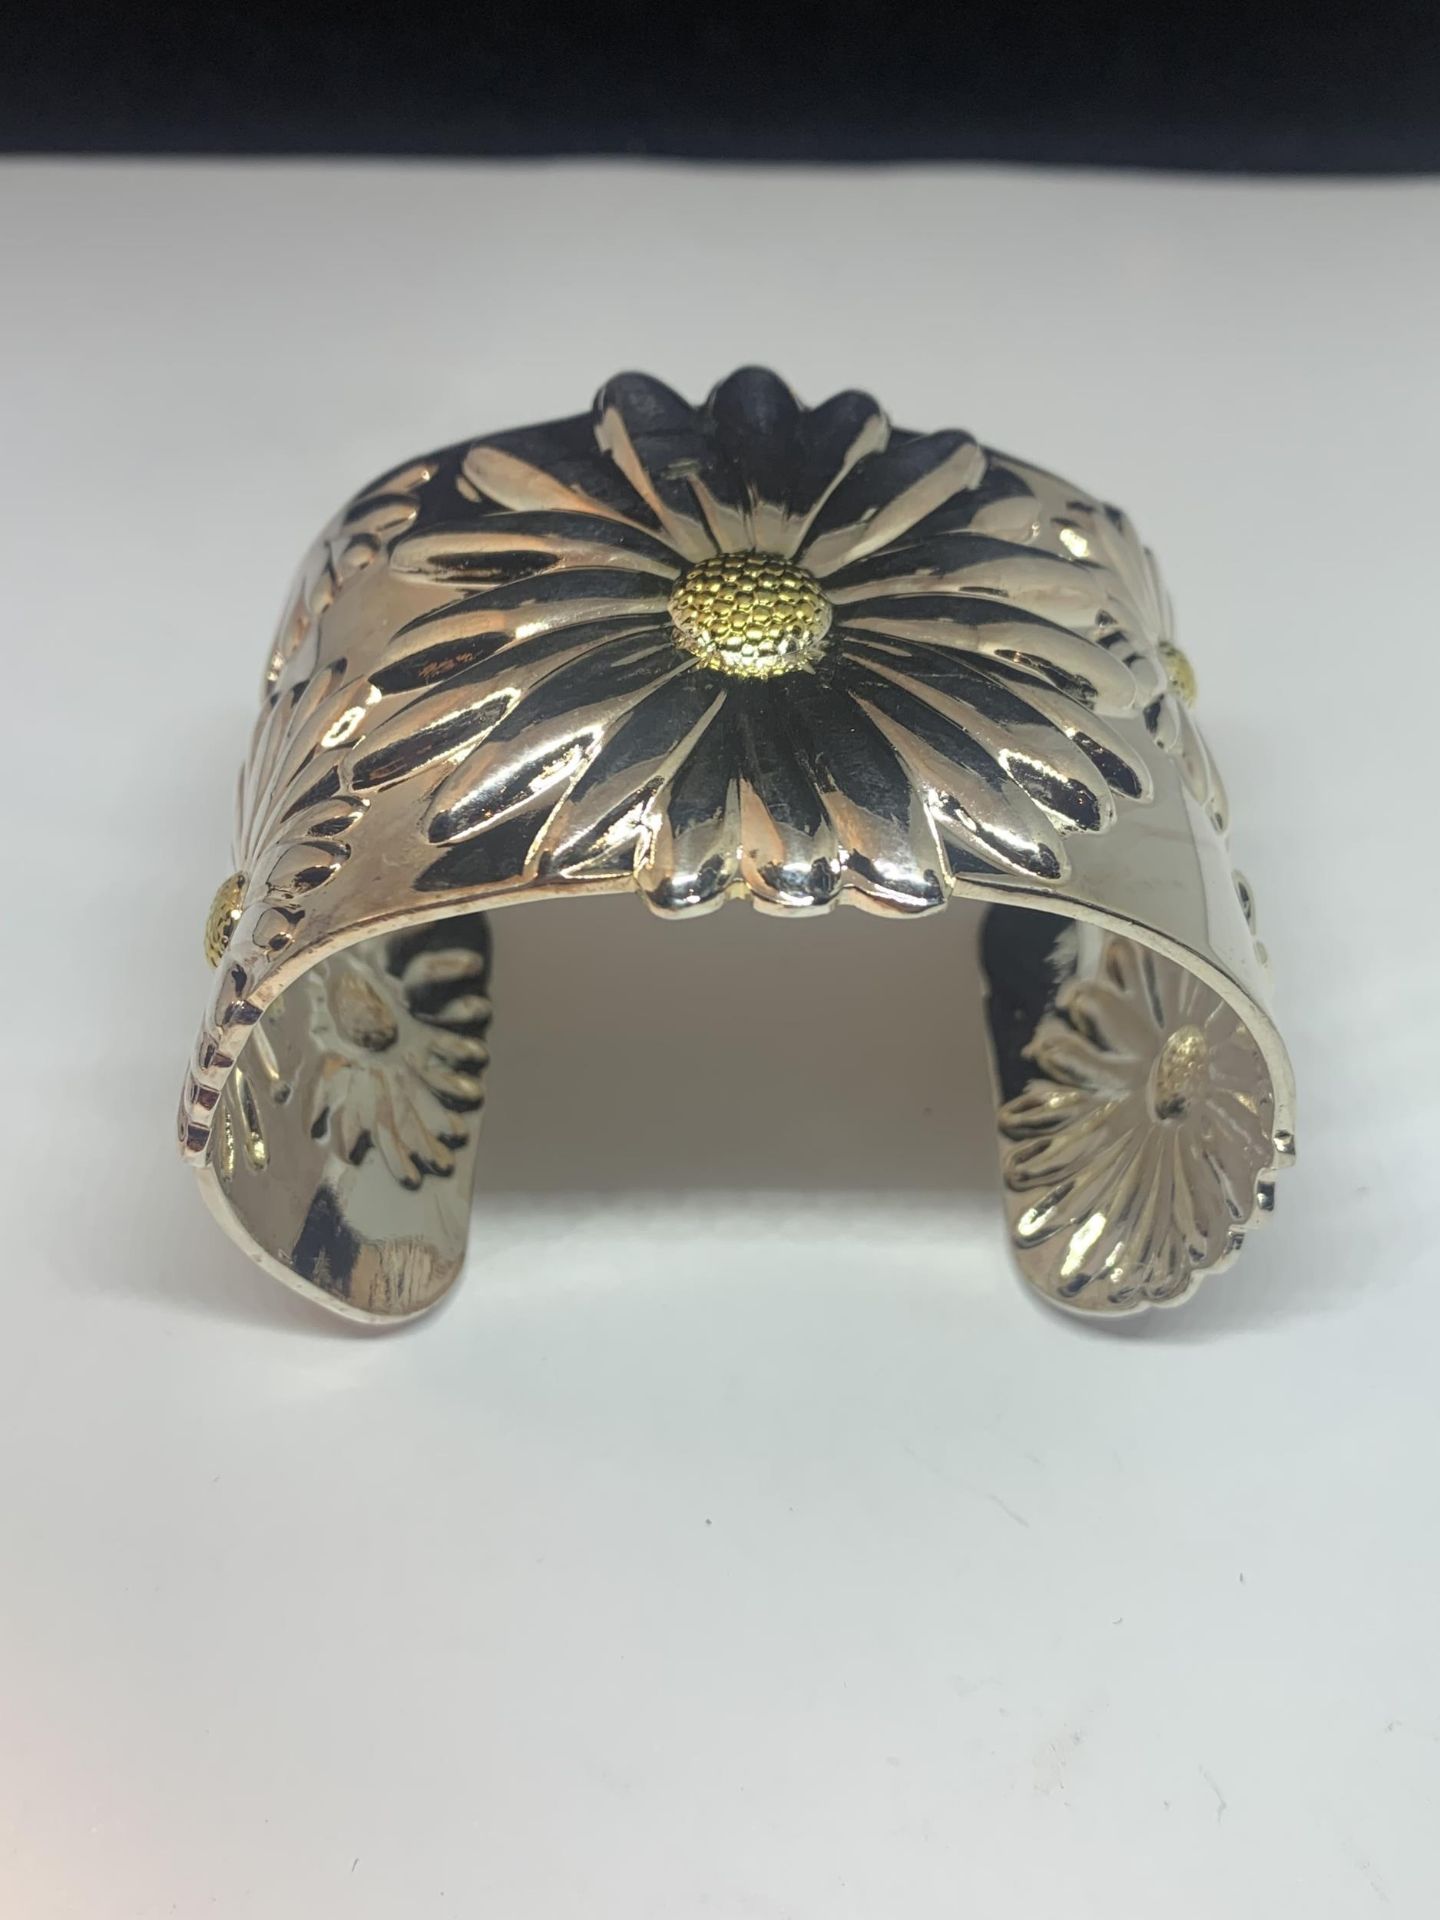 A MARKED 925 HEAVY BANGLE WITH SUNFLOWER DESIGN